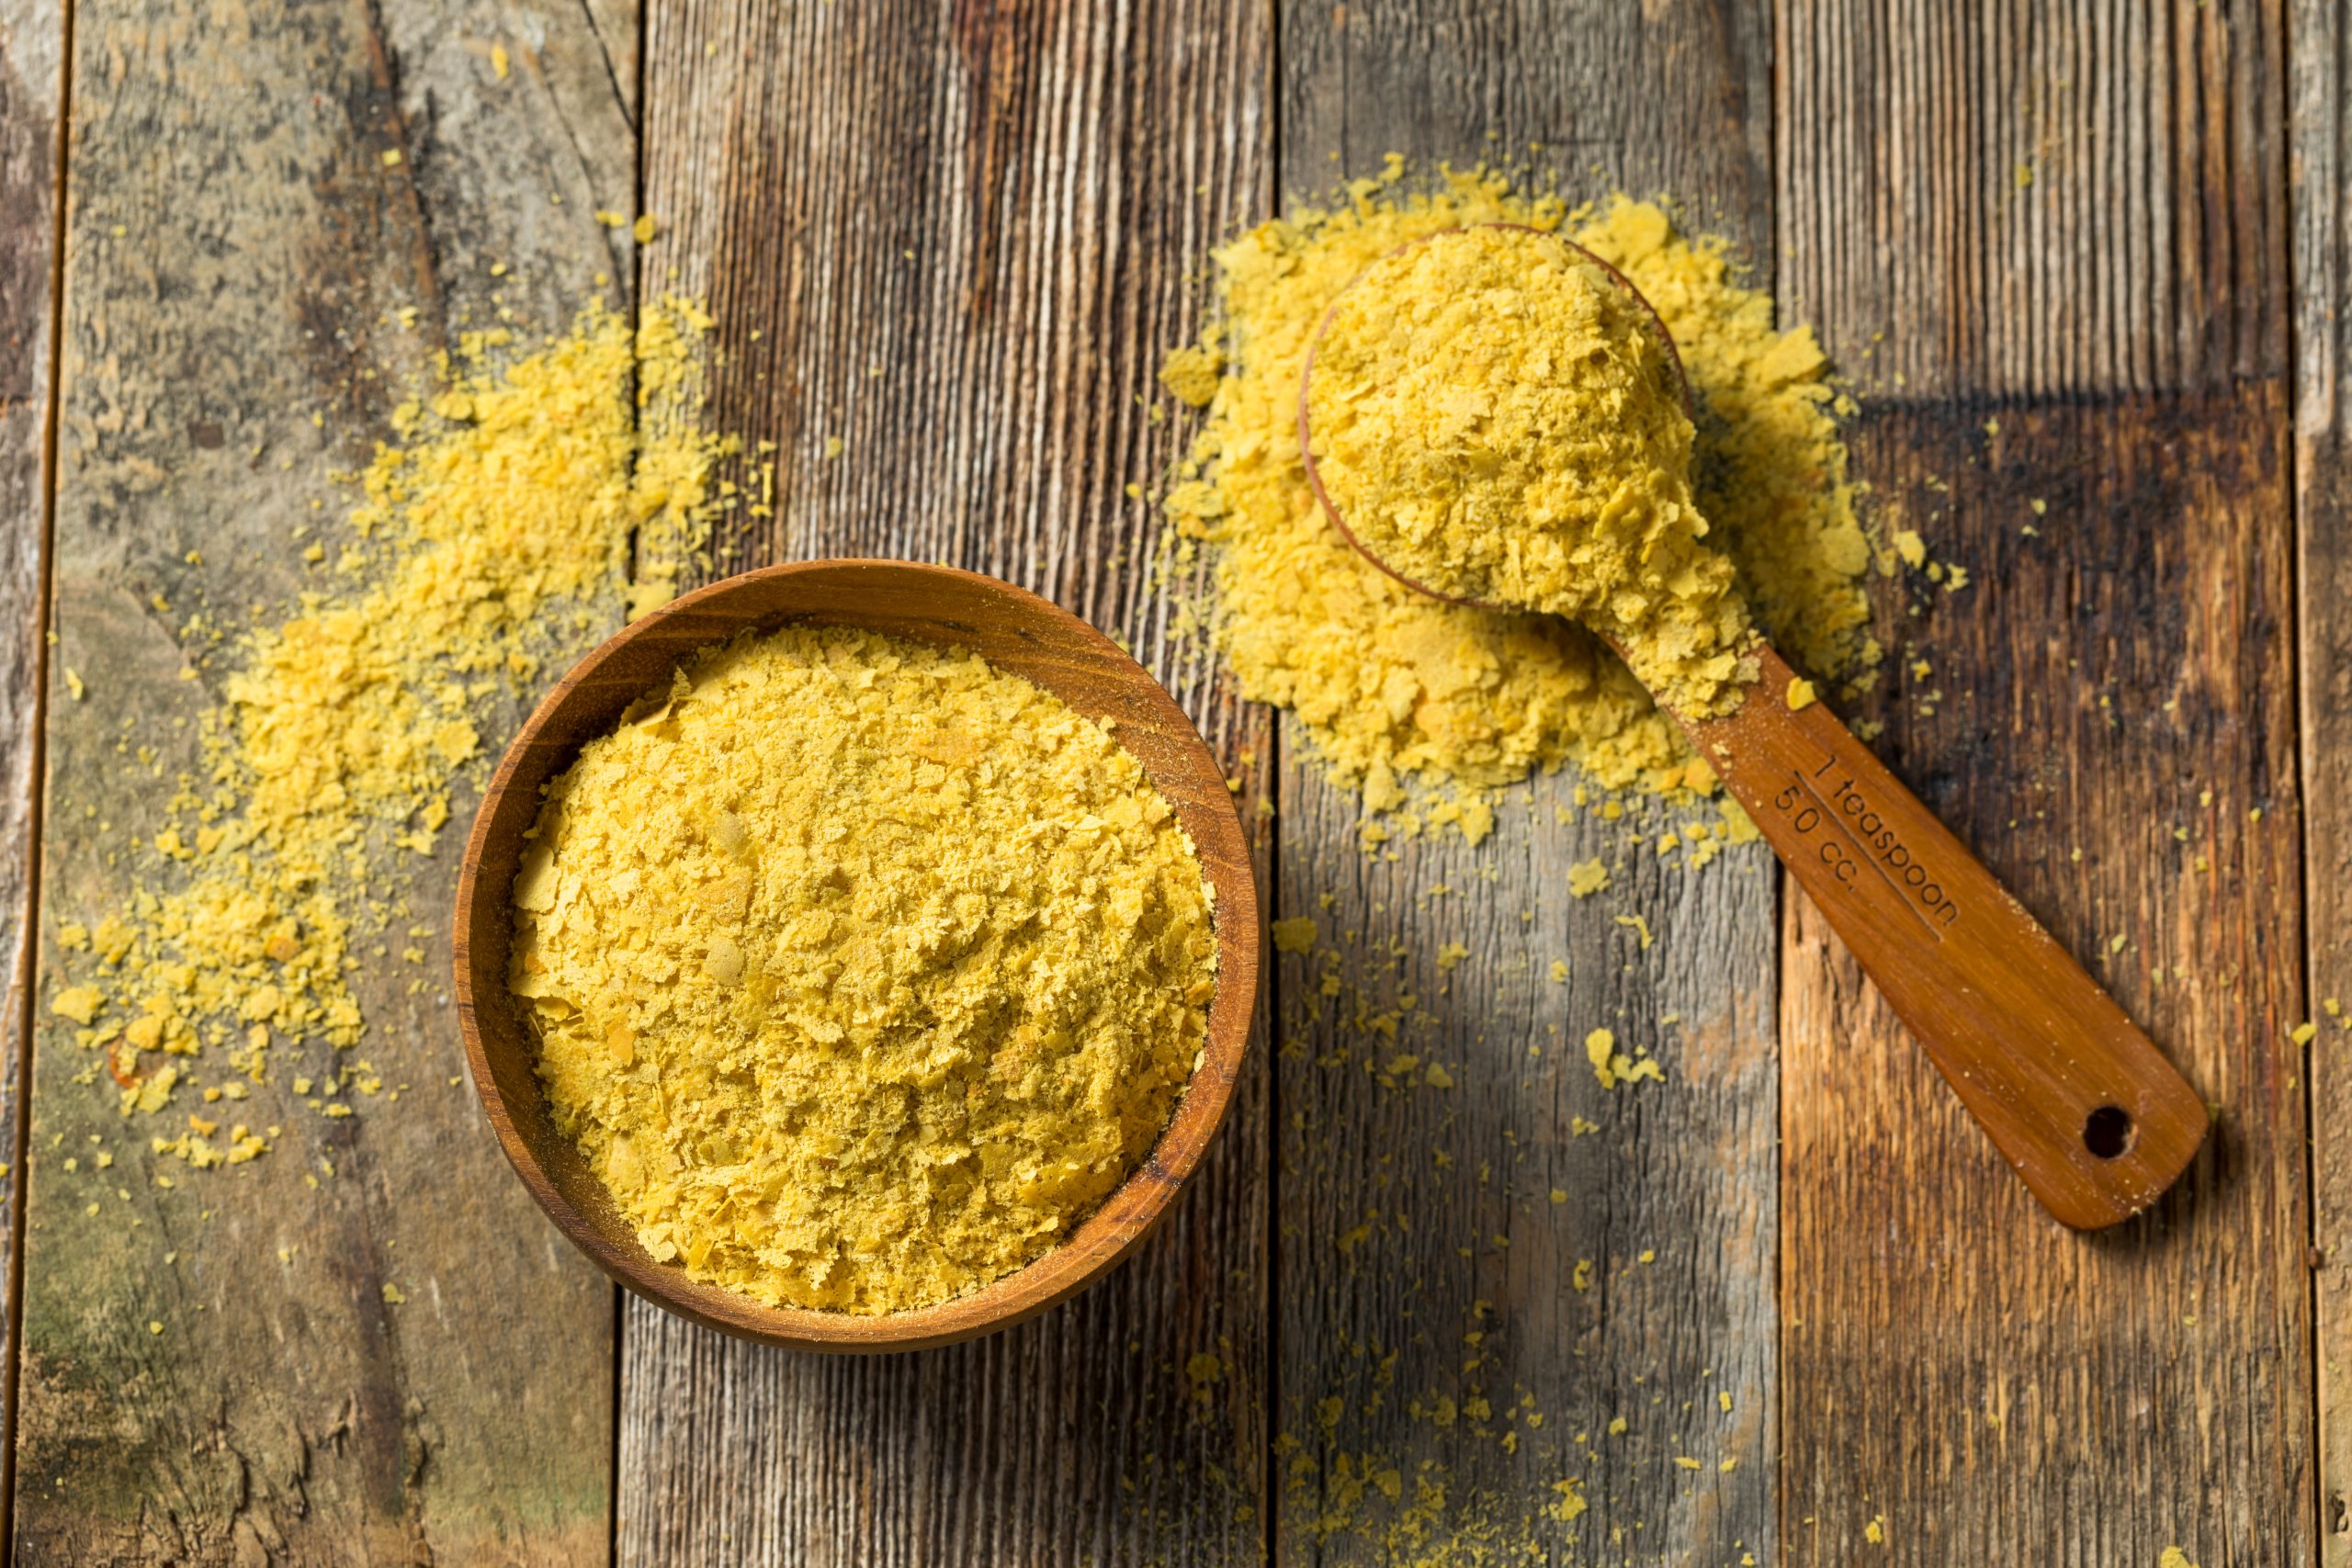 nutritional yeast, what is nutritional yeast, nutritional yeast benefits, nutritional yeast substitute, nutritional yeast recipes,benefits of nutritional yeast, is nutritional yeast good for you